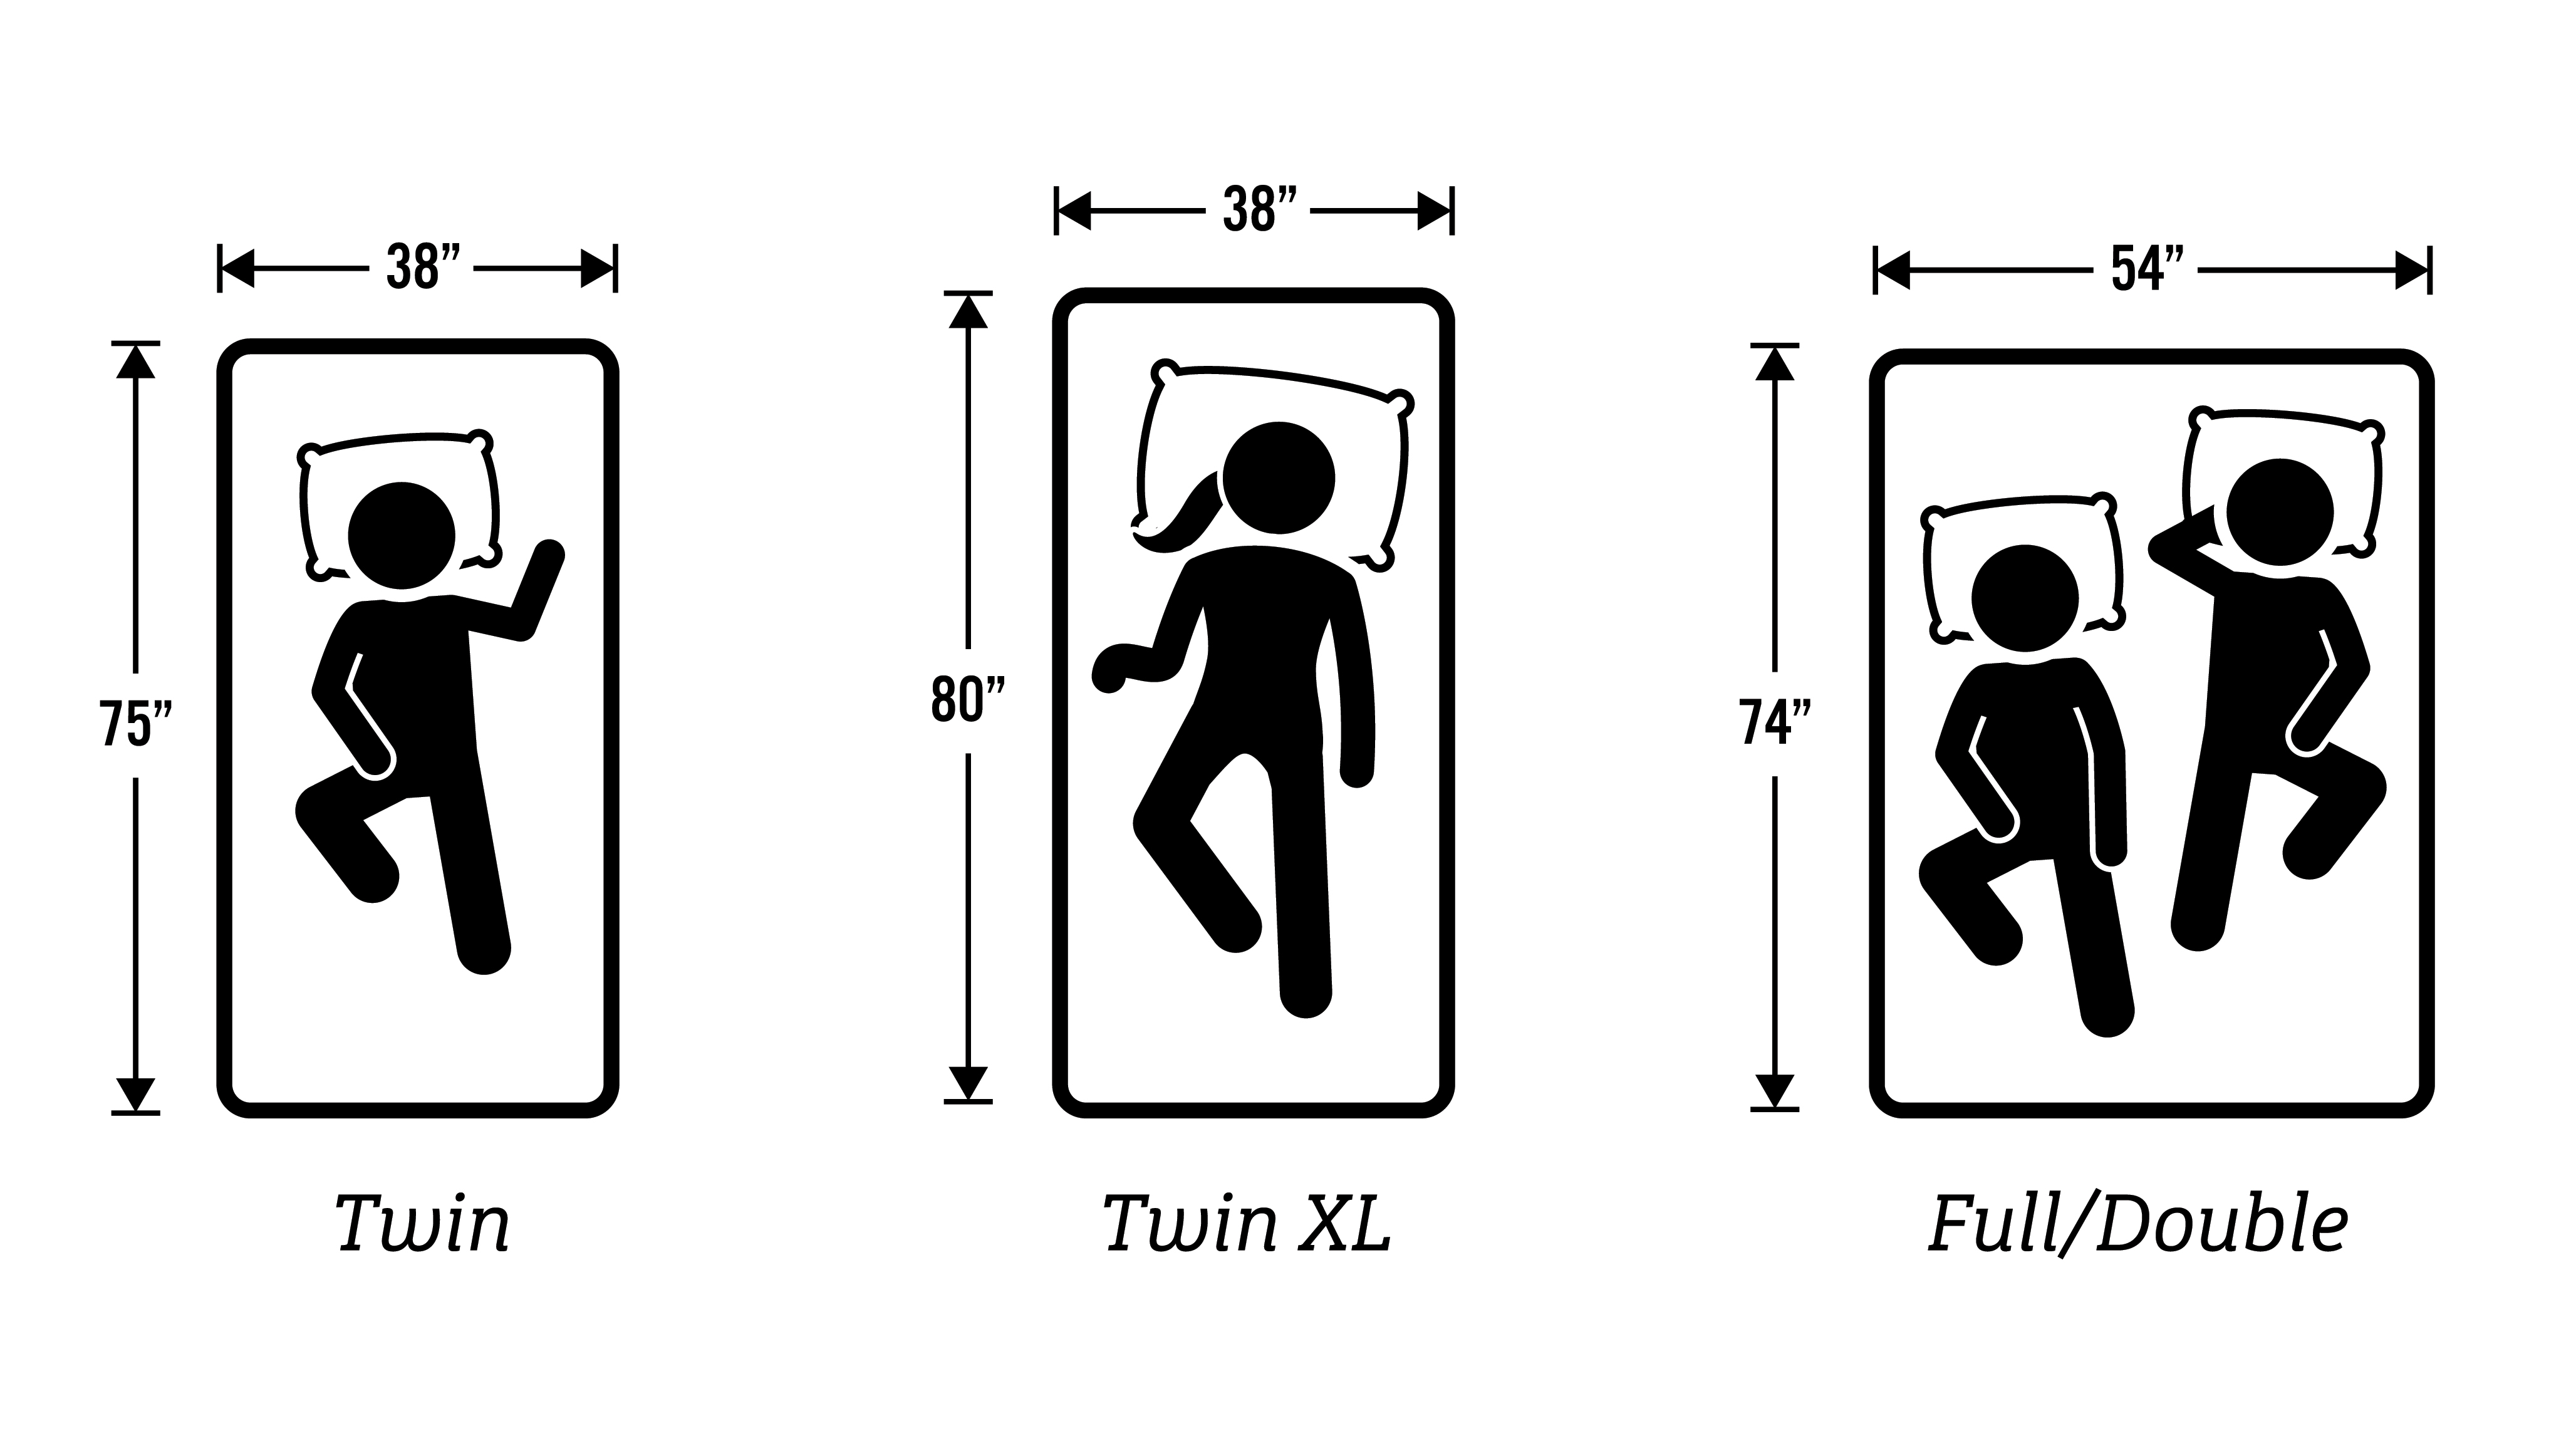 Icons for people sleeping on a double bed, a large twin XL and a full bed, with dimension measurements written next to a meltaway bed, a queen bed, and a king size bed.